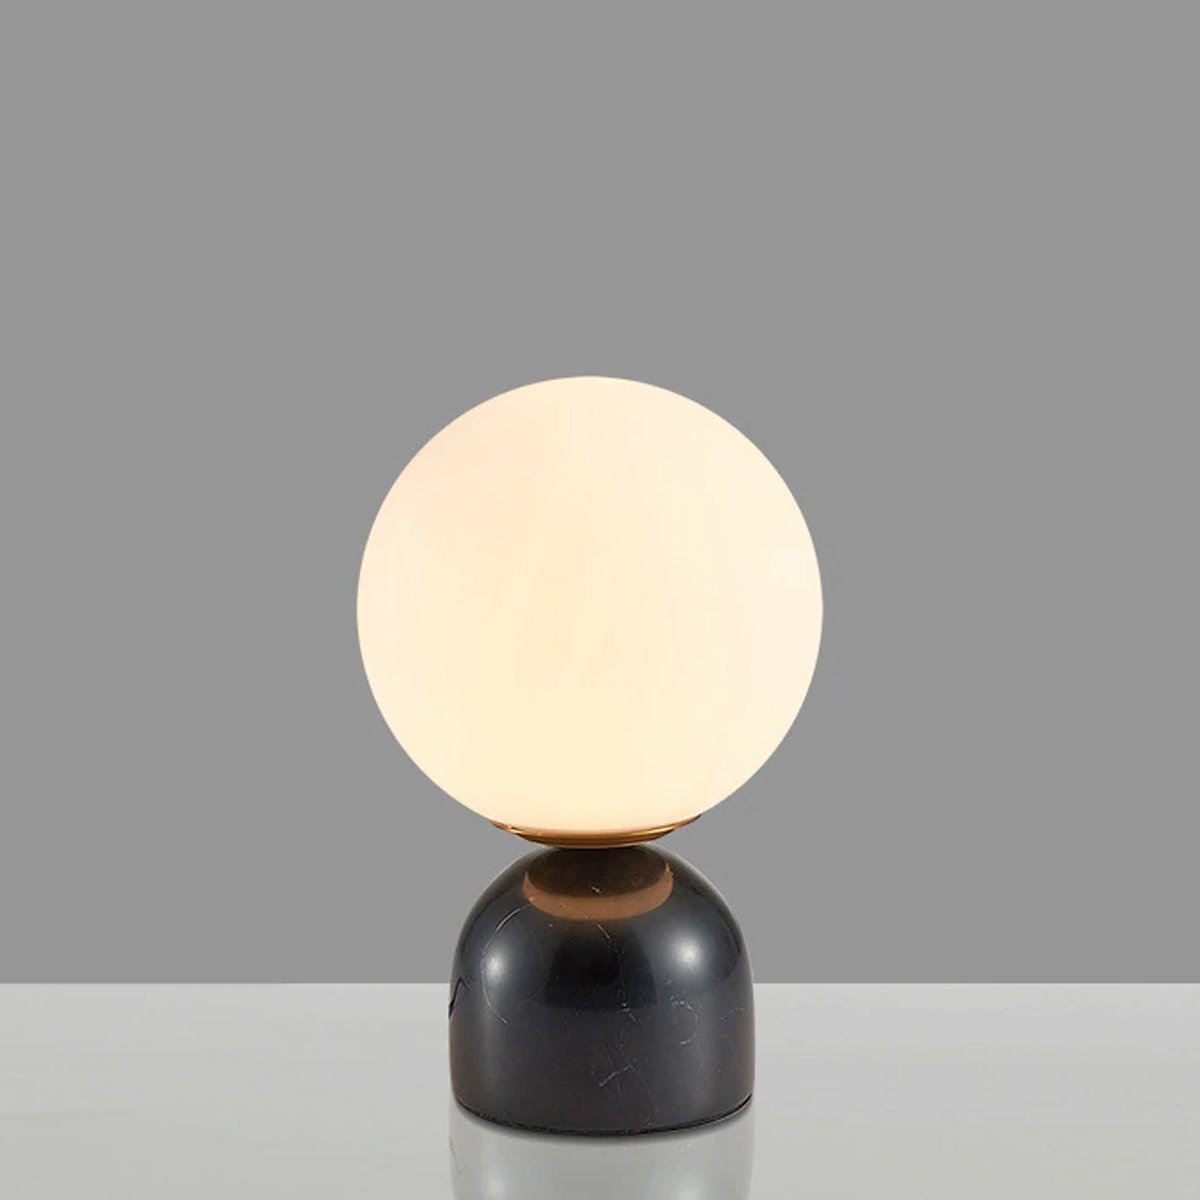 Marble Globe table light in Black or White Art Deco Black Base – By CGC Interiors